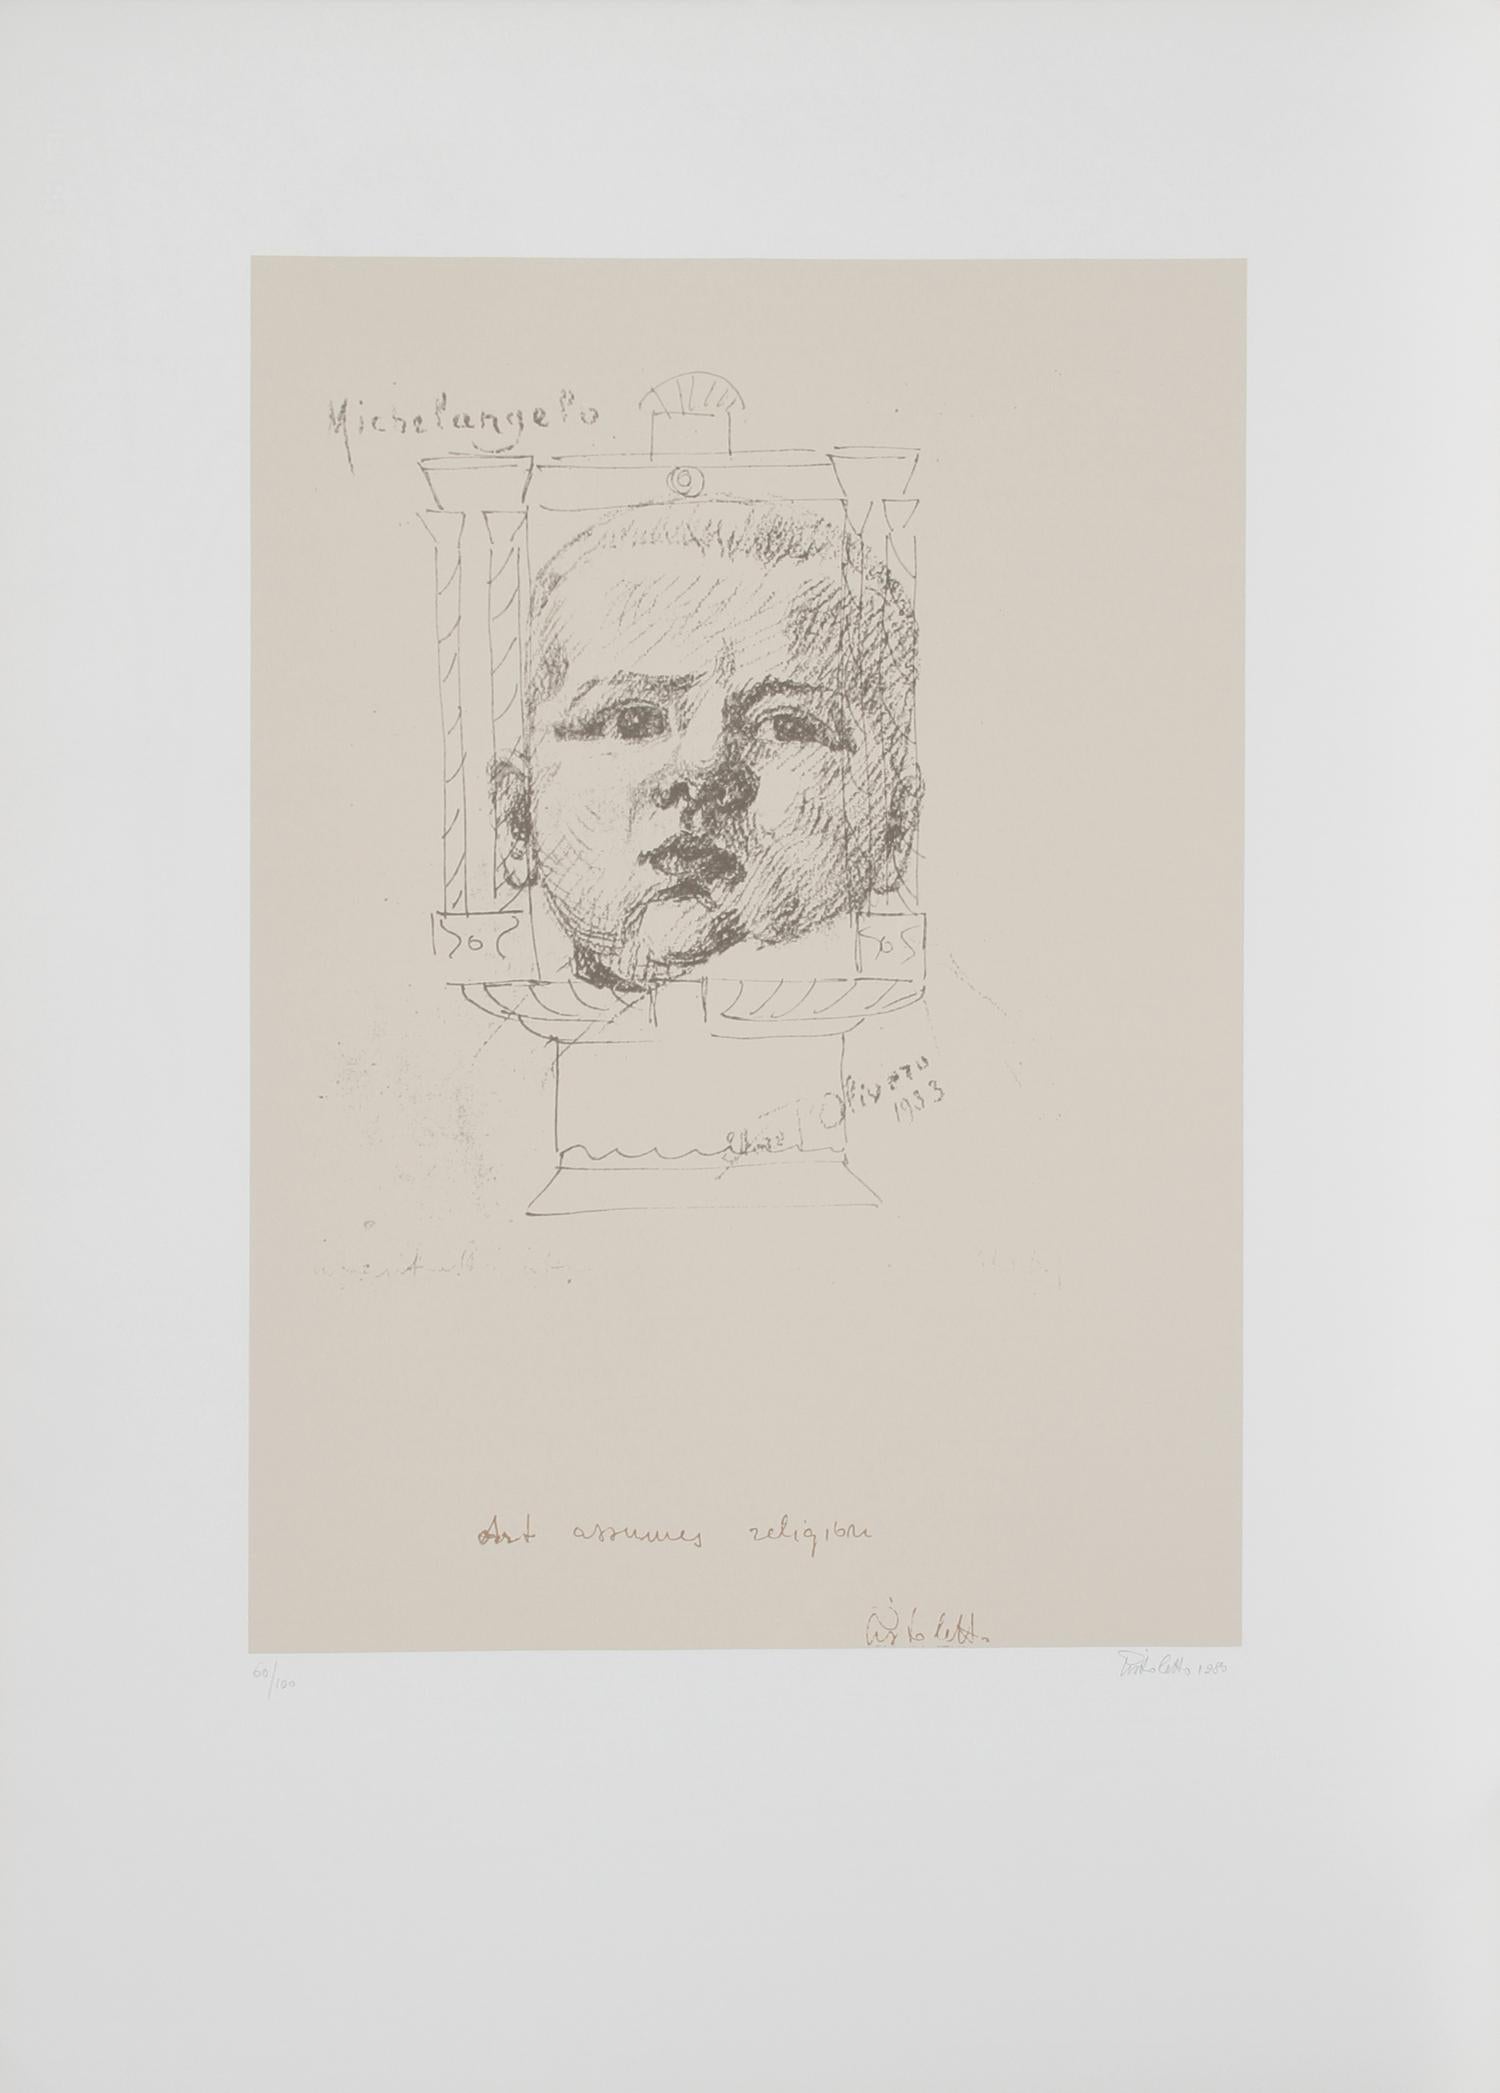 Artist: Michelangelo Pistoletto, Italian (1933 - )
Title: II from the I am Third Series
Year: 1980    
Medium: Silkscreen, signed and numbered in pencil
Edition: 100
Paper Size: 42 x 29 inches